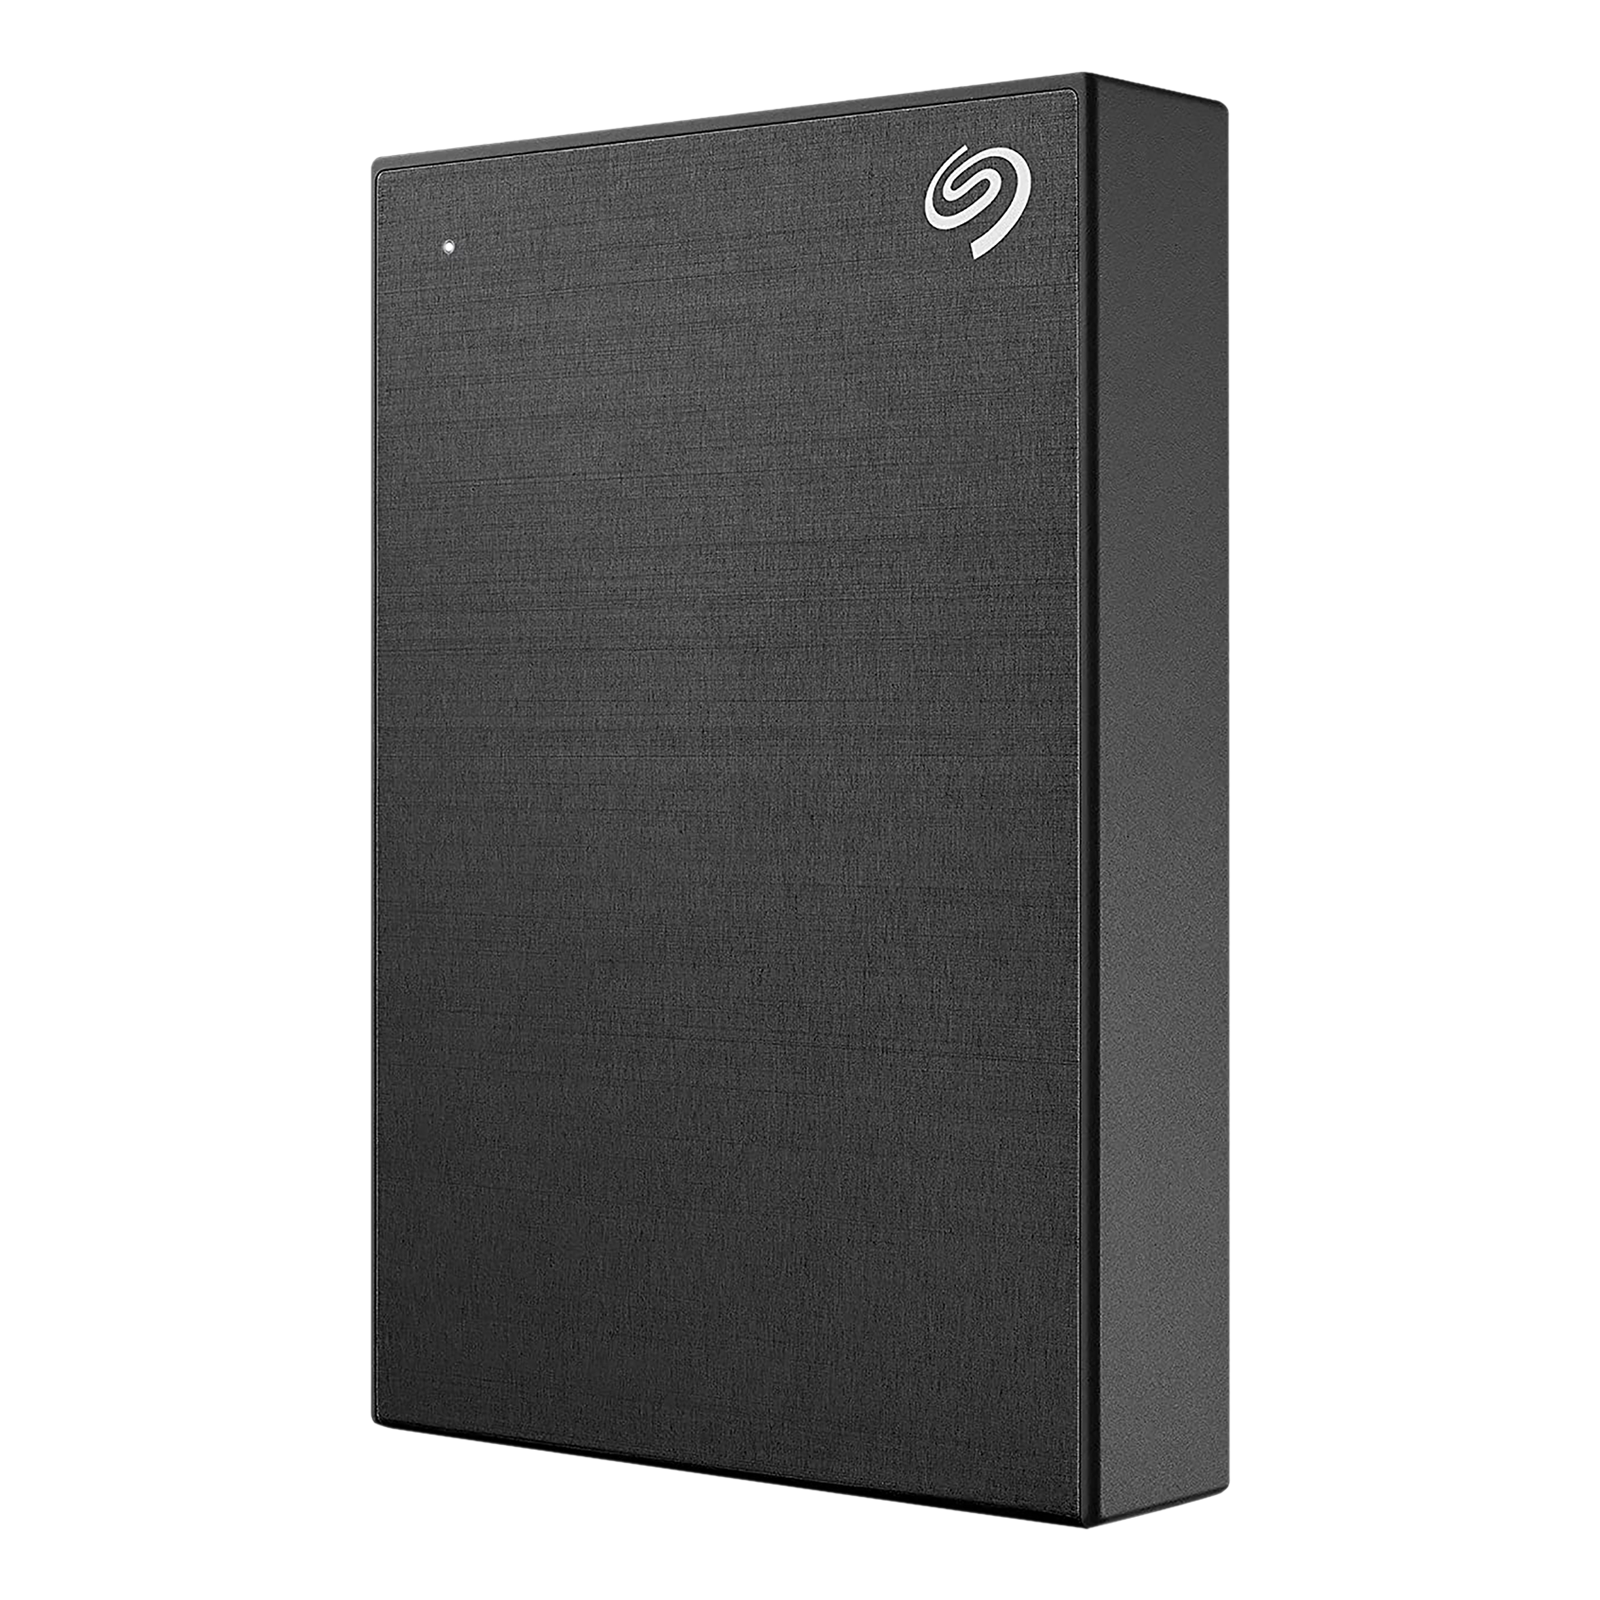 SEAGATE One Touch 4TB USB 3.0 Hard Disk Drive (Advanced Password Protection, STKZ4000400, Black)